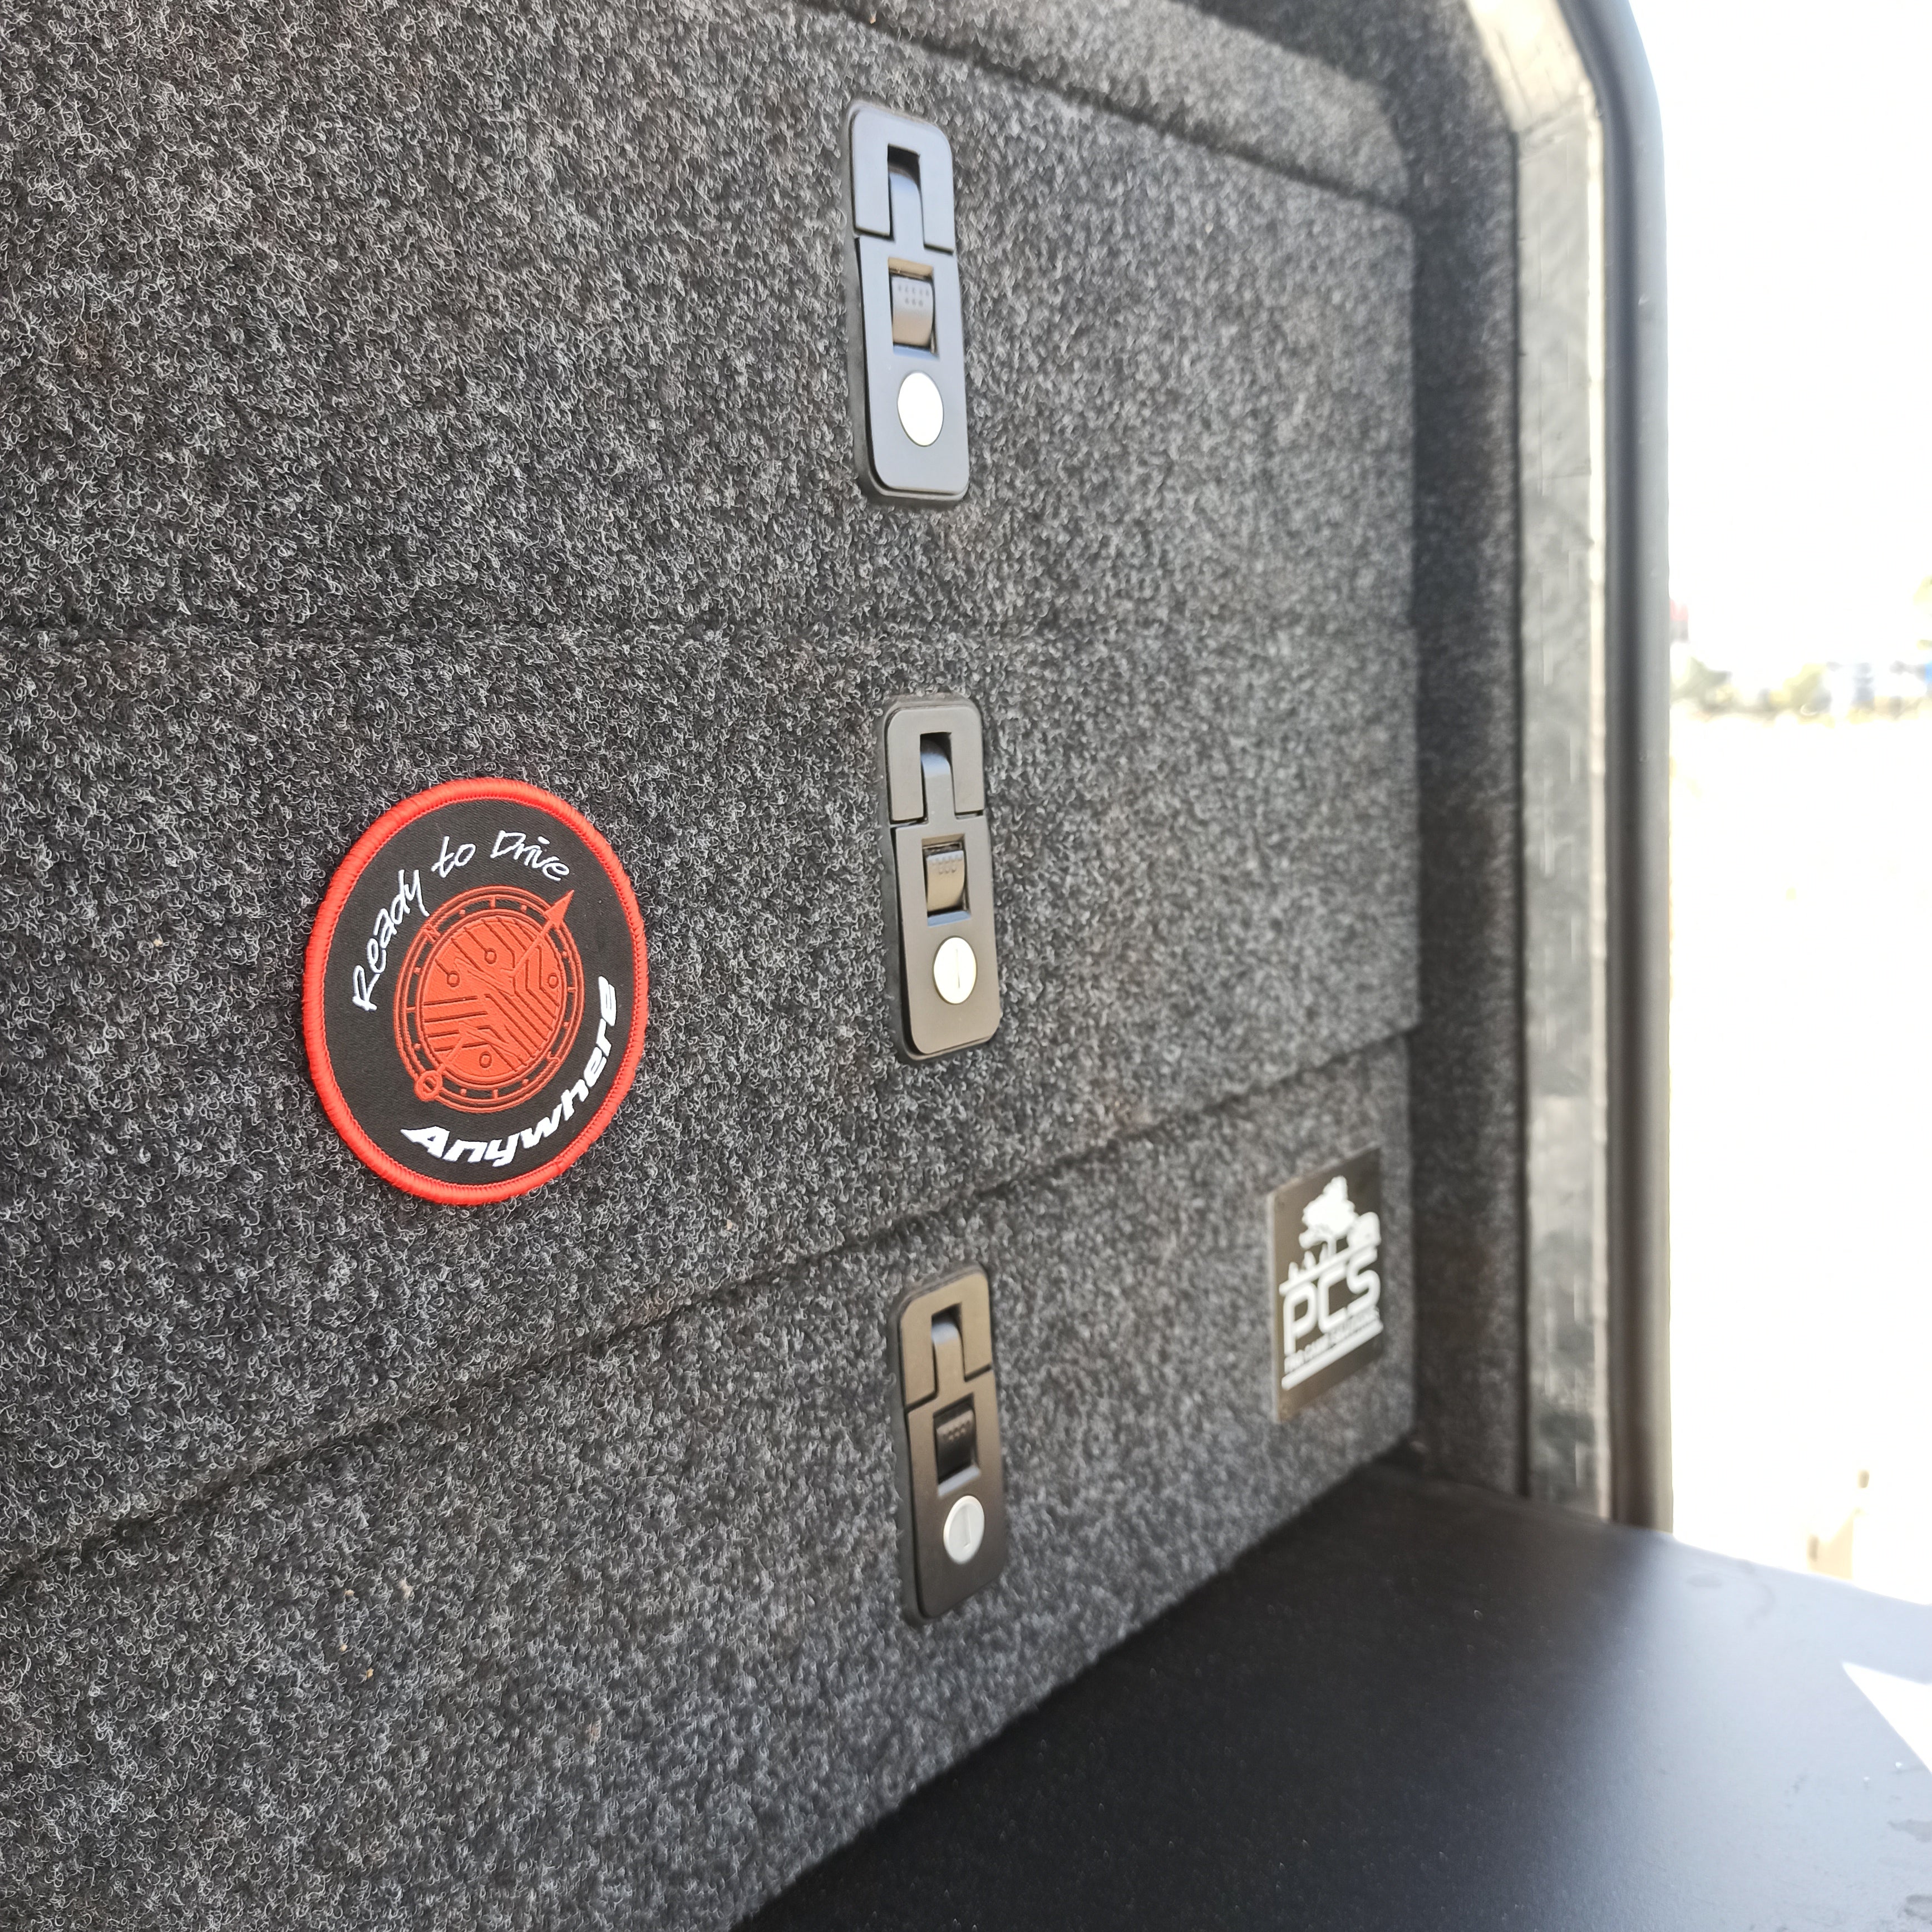 Ready to drive anywhere Velcro Patch on drawers Perth Pro Auto Electric Parts Klarmann 4WD Community